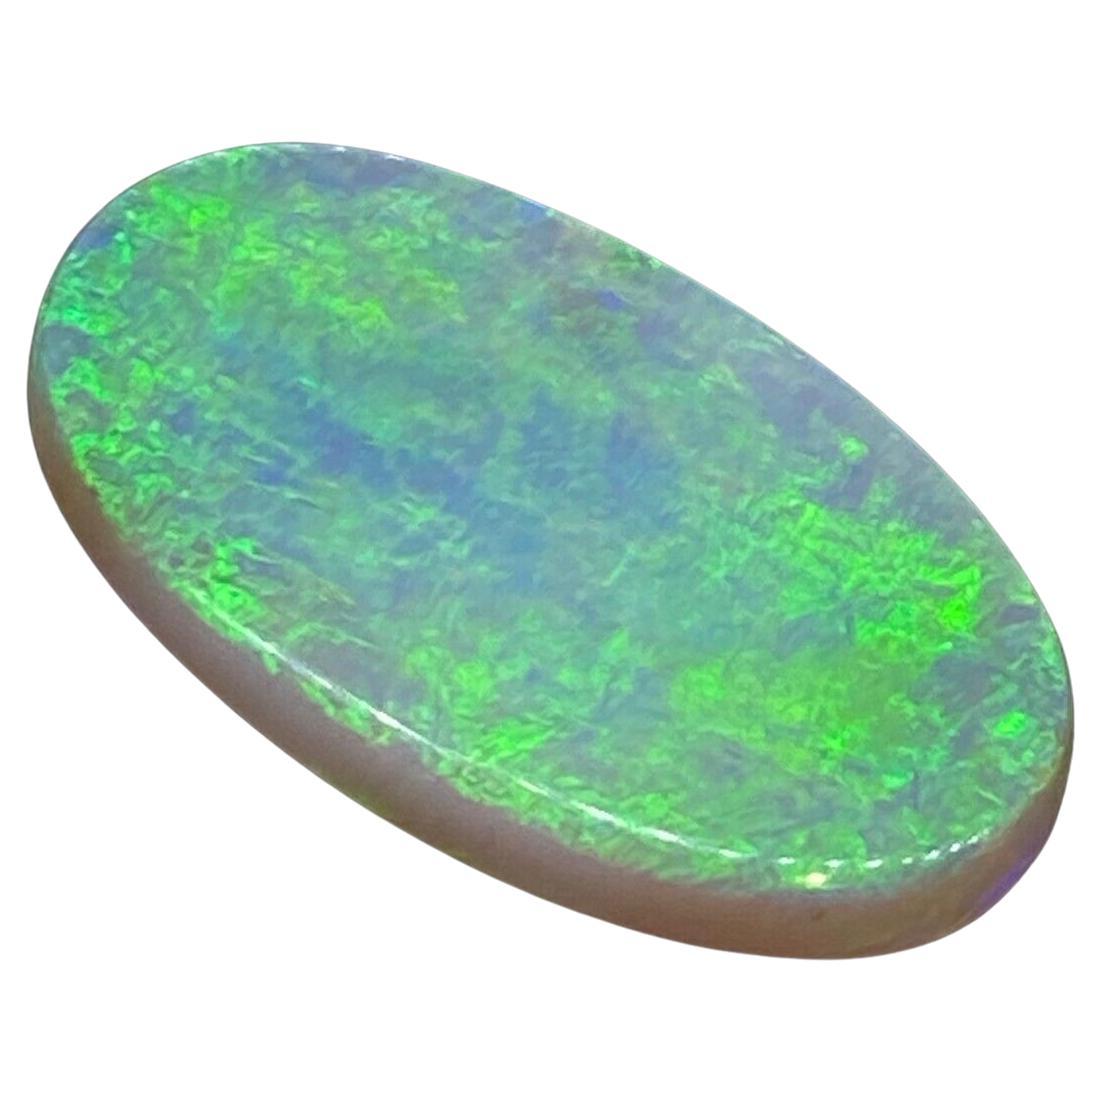 10.32ct Oval Cabochon Cut Loose Australian Opal. Valued at $10000. For Sale